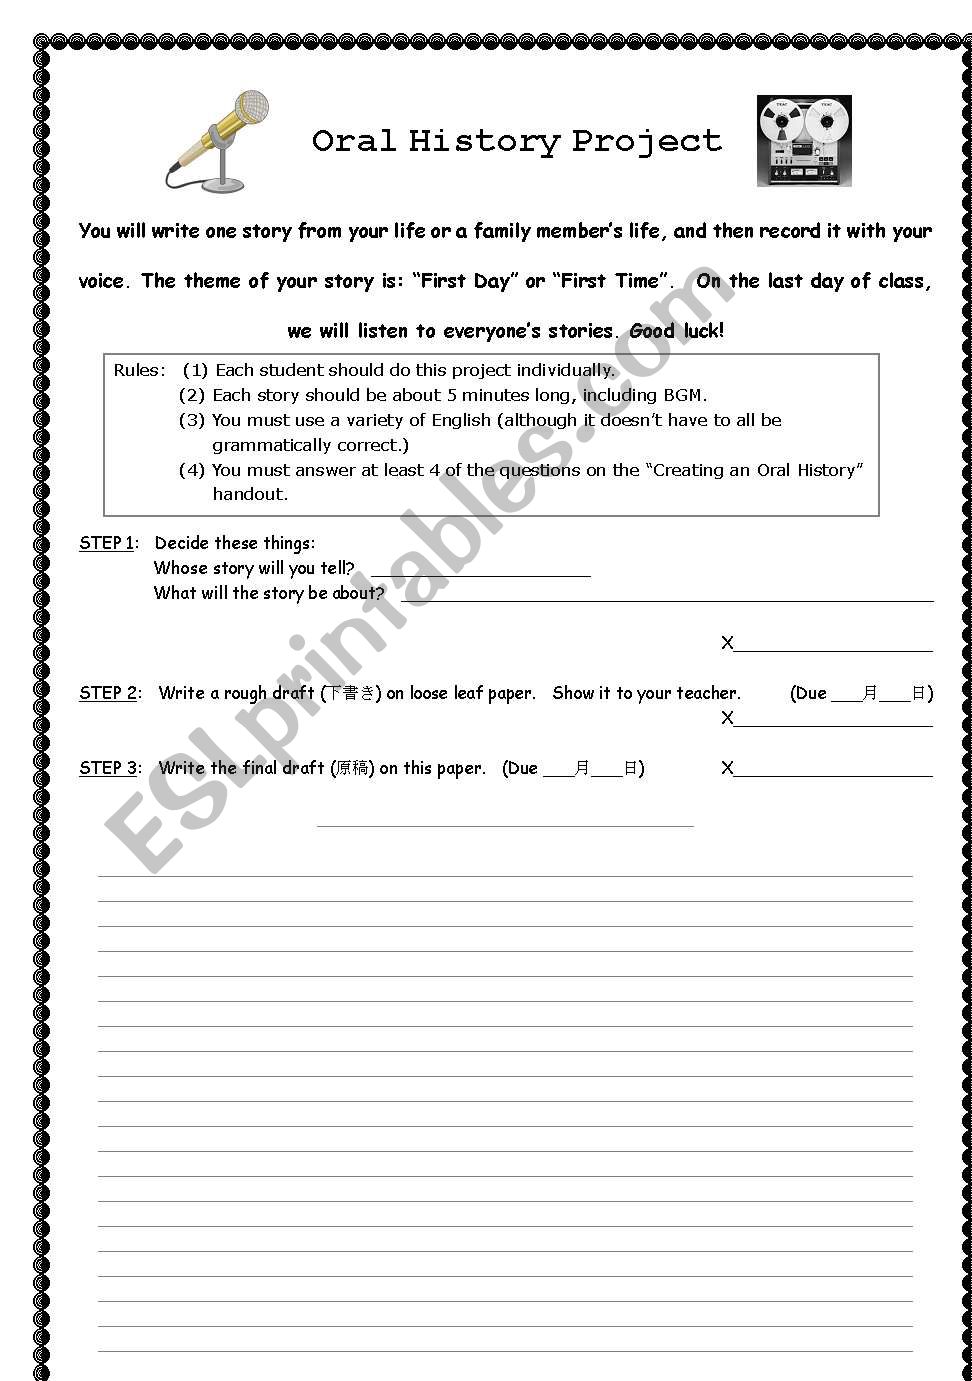 Oral History Project worksheet